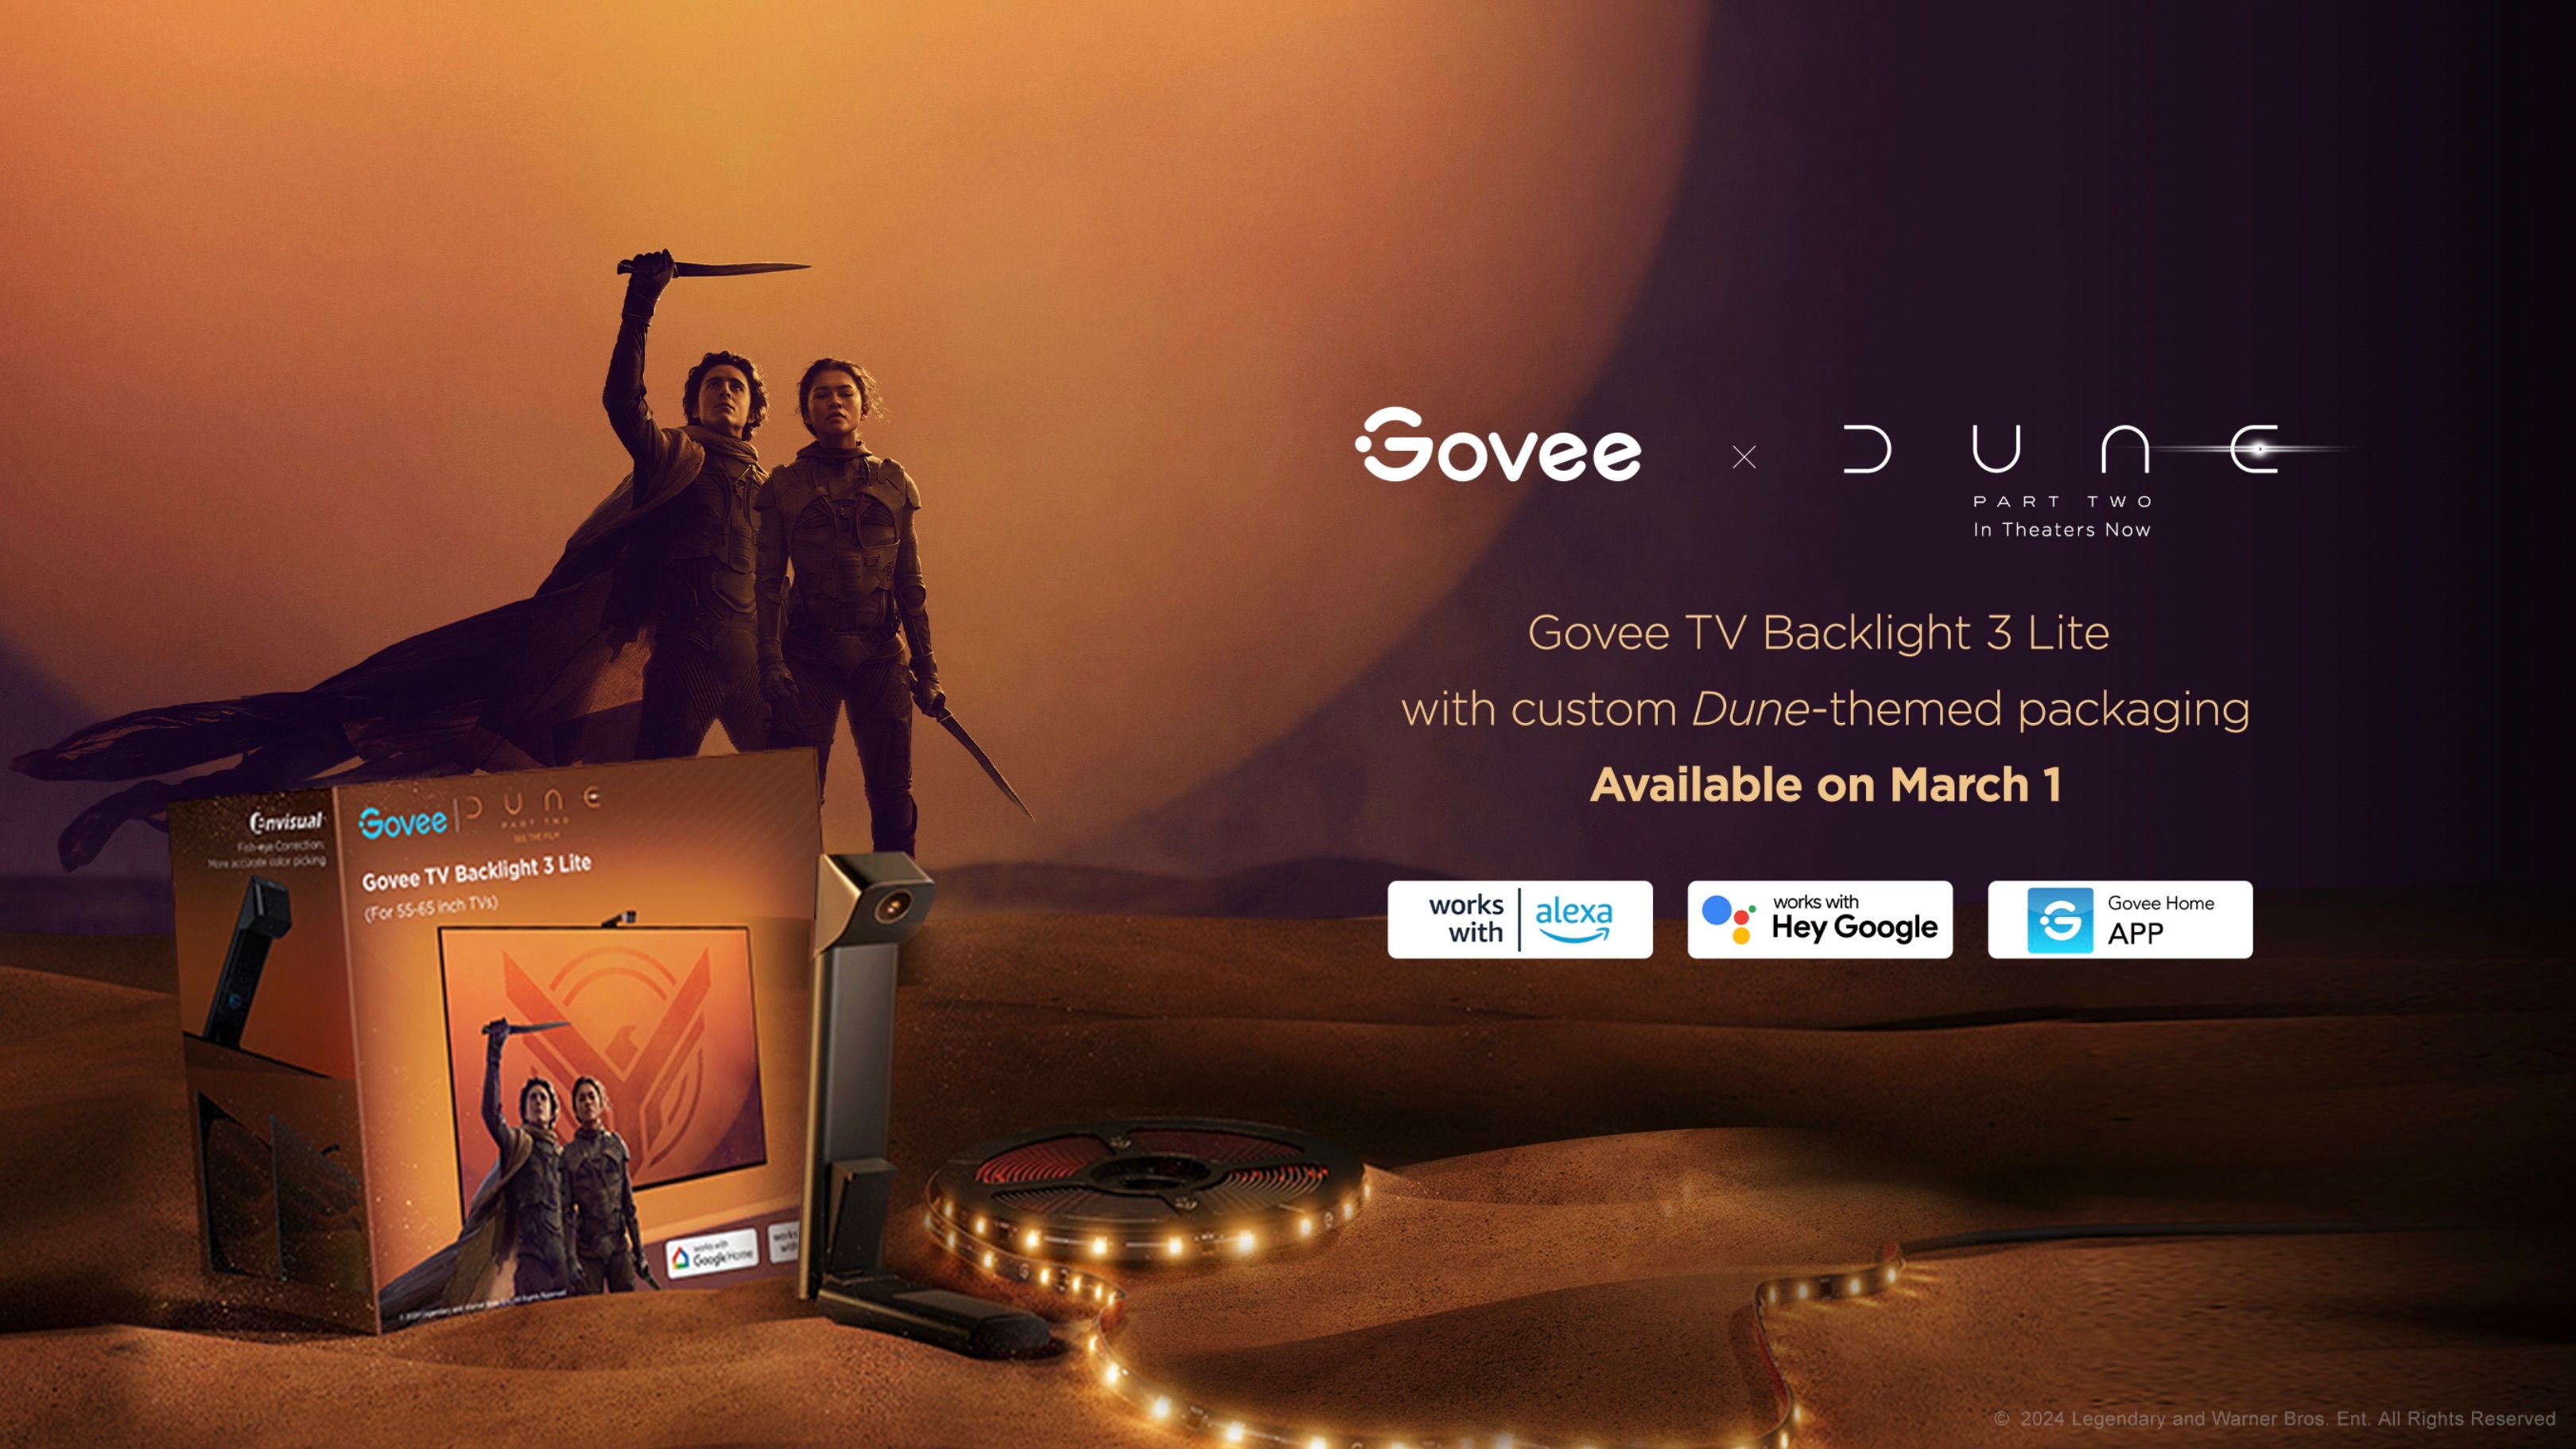 Product package for the Dune x Govee TV Backlight 3 Lite